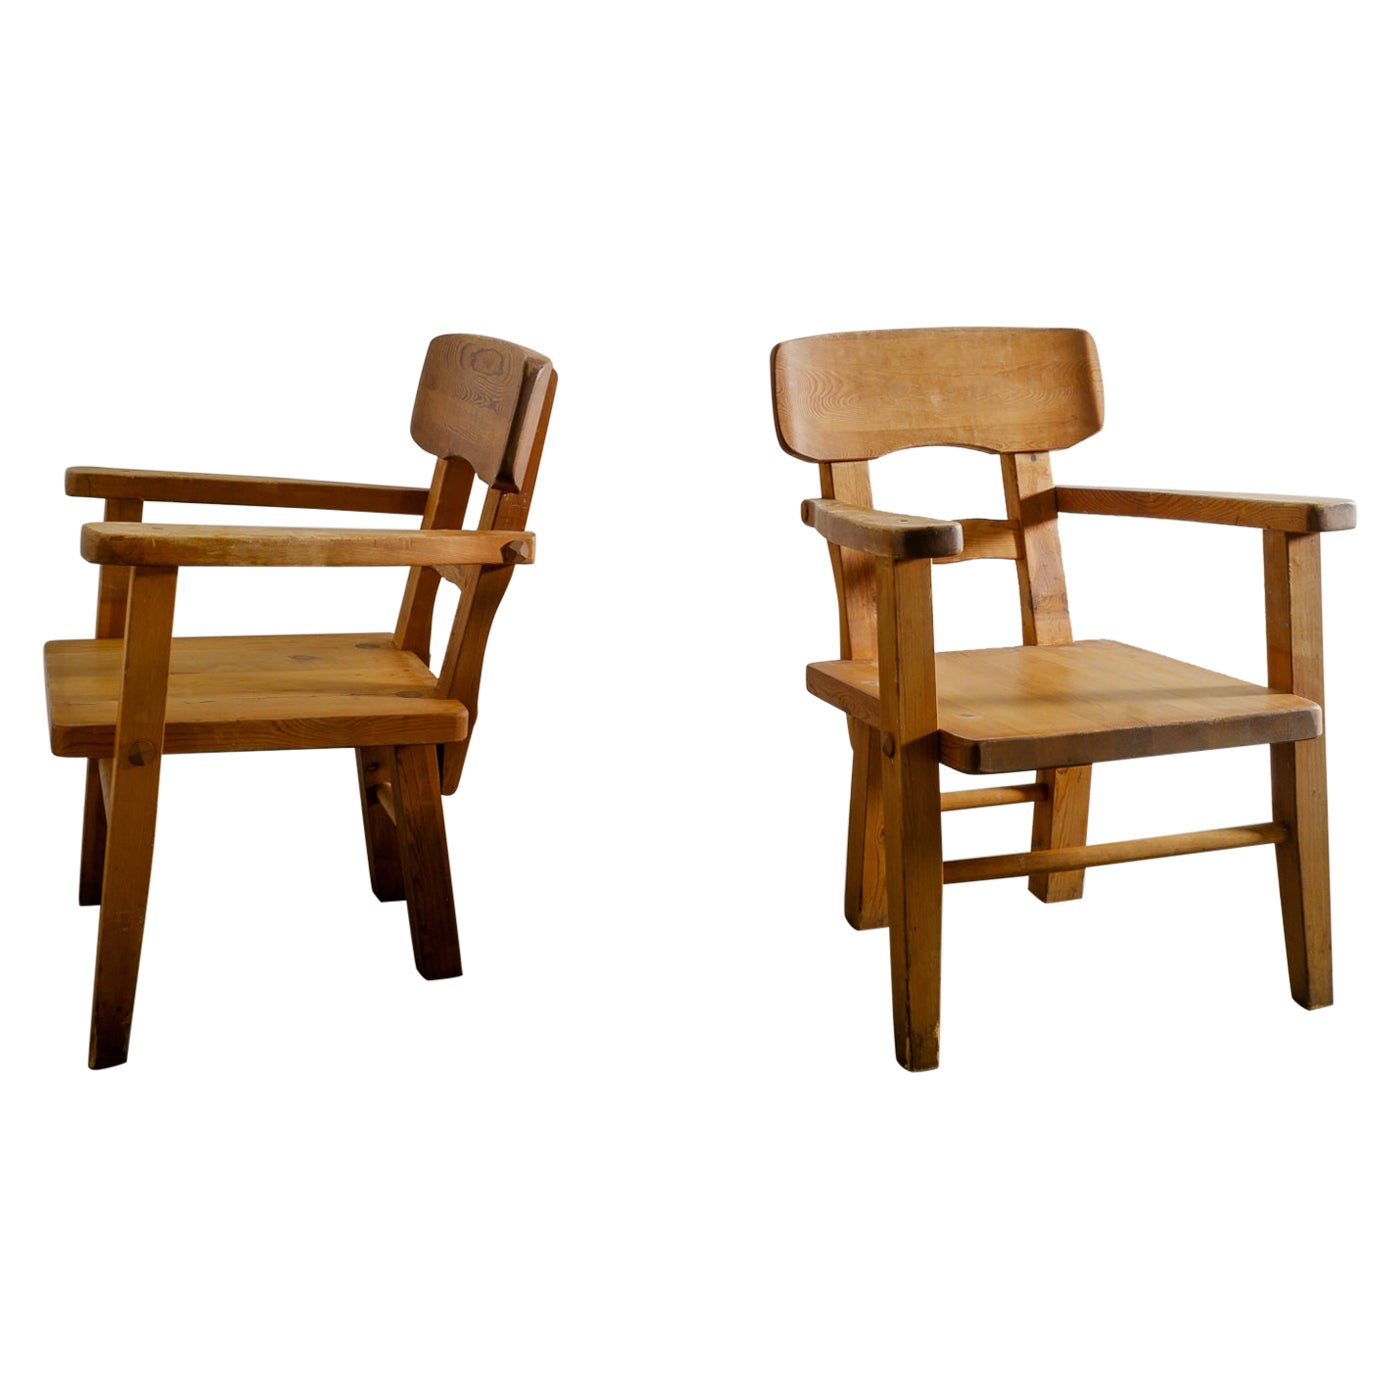 Pair of Swedish Brutalist Armchairs in Stained Pine Produced by Vemdalia, 1970s For Sale